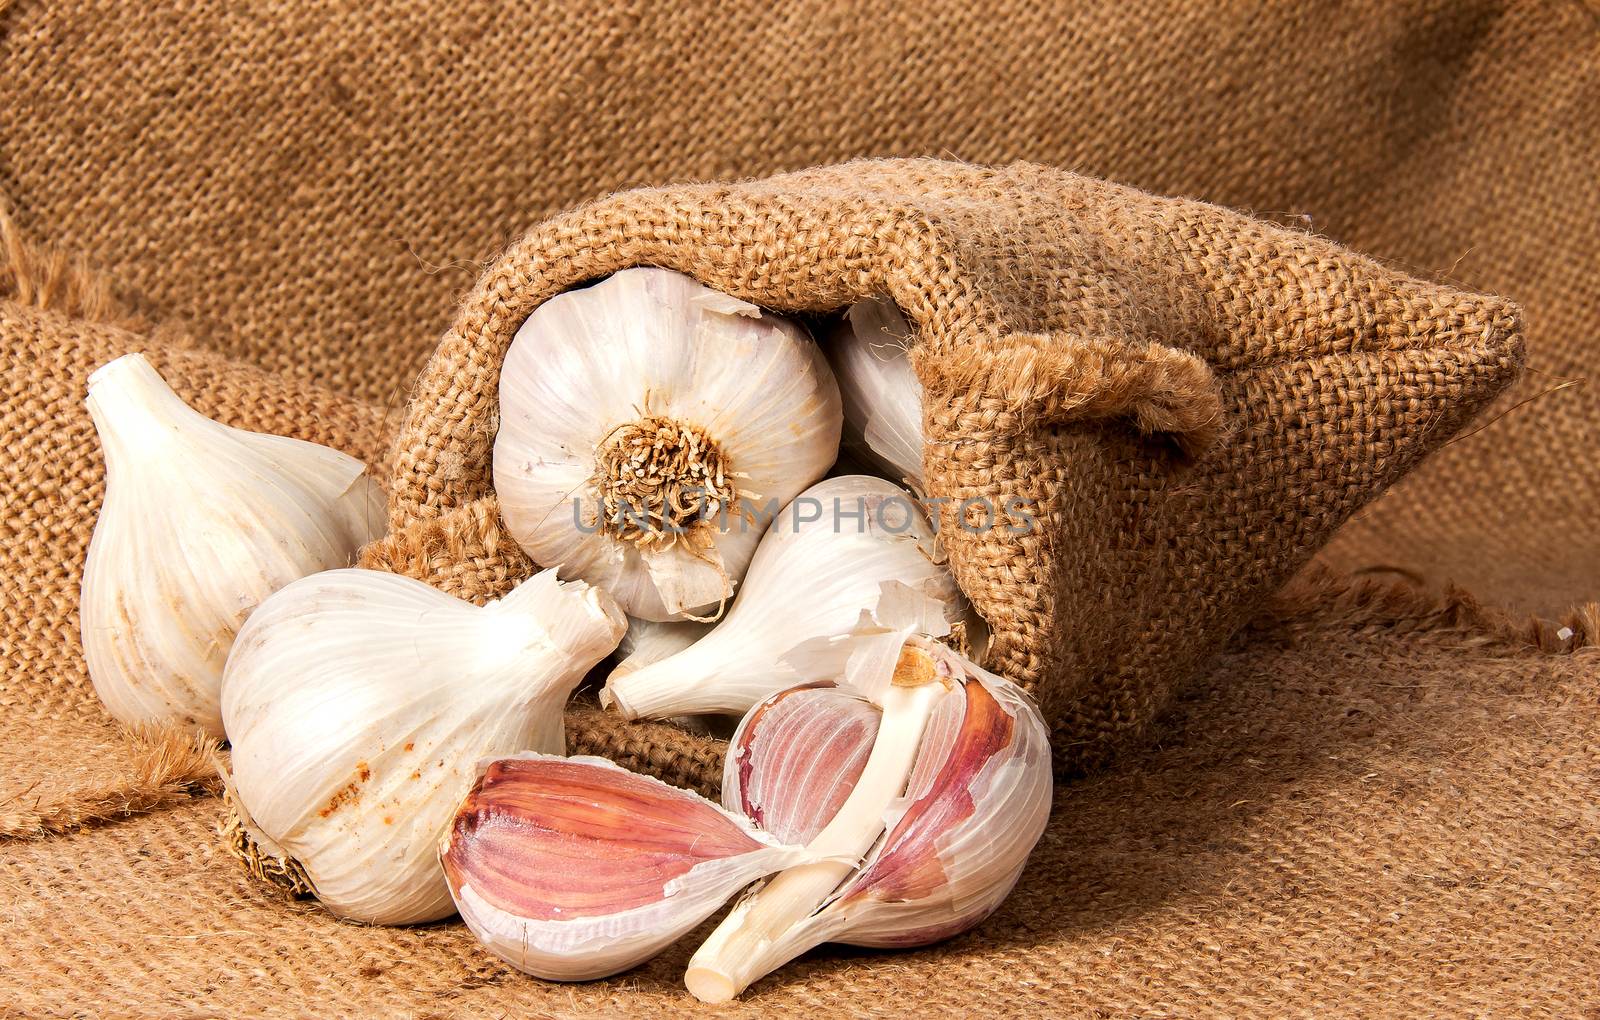 Whole garlic and cloves of garlic in a bag on sacking